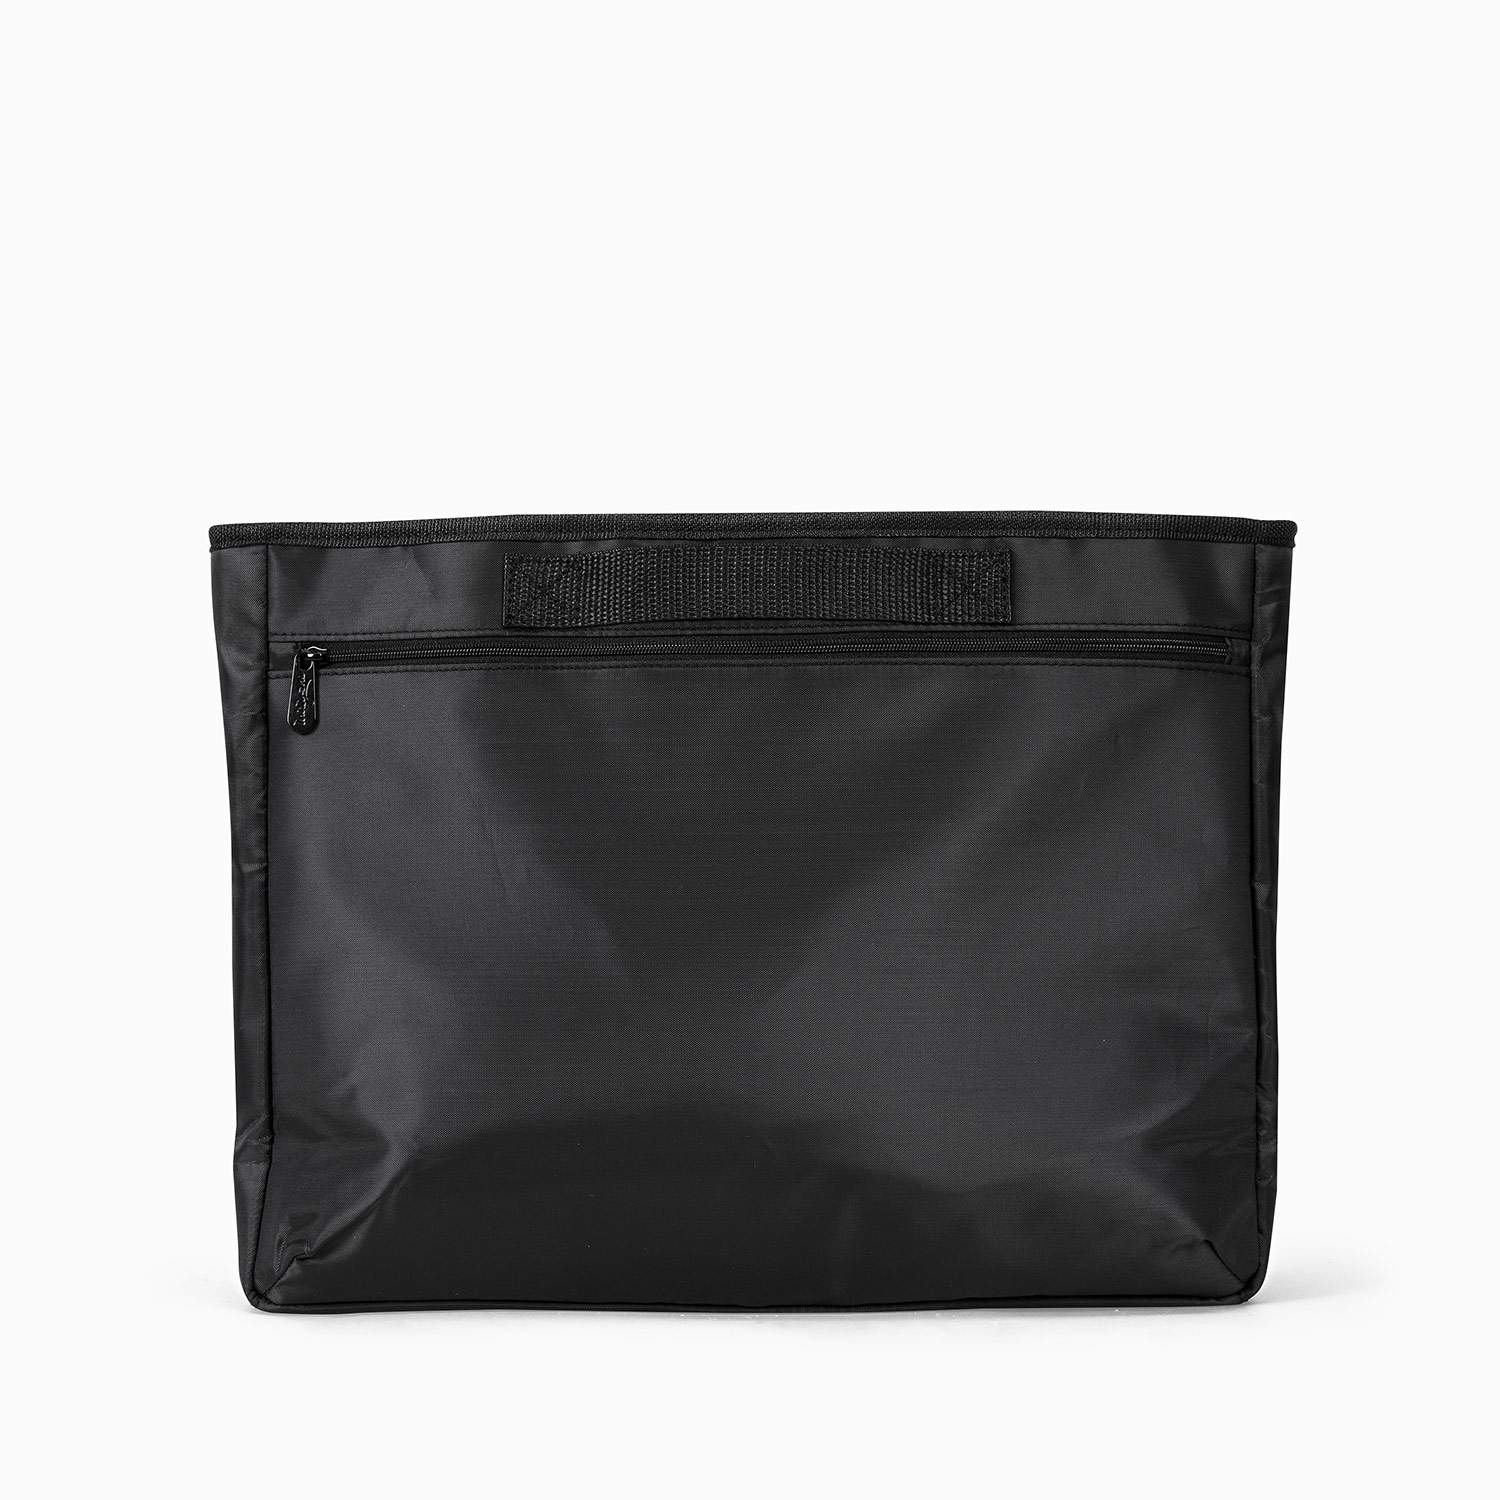 BOOTSTRAPT 18 in. Contractor's Tote Bag with Integrated Parts Bin Compartment and Waterproof Rain Cover, Black